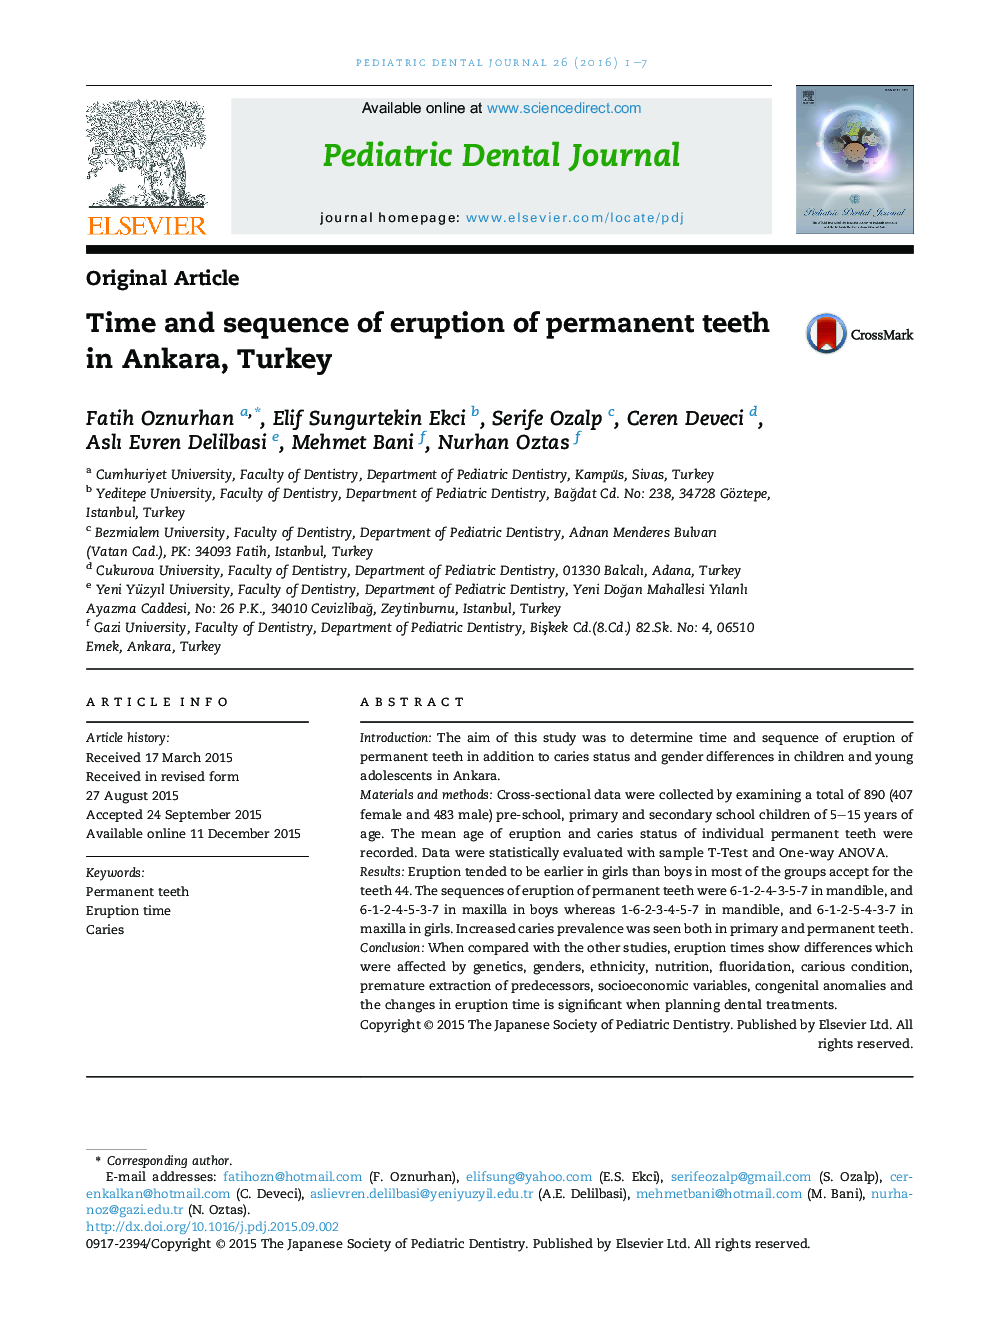 Time and sequence of eruption of permanent teeth in Ankara, Turkey